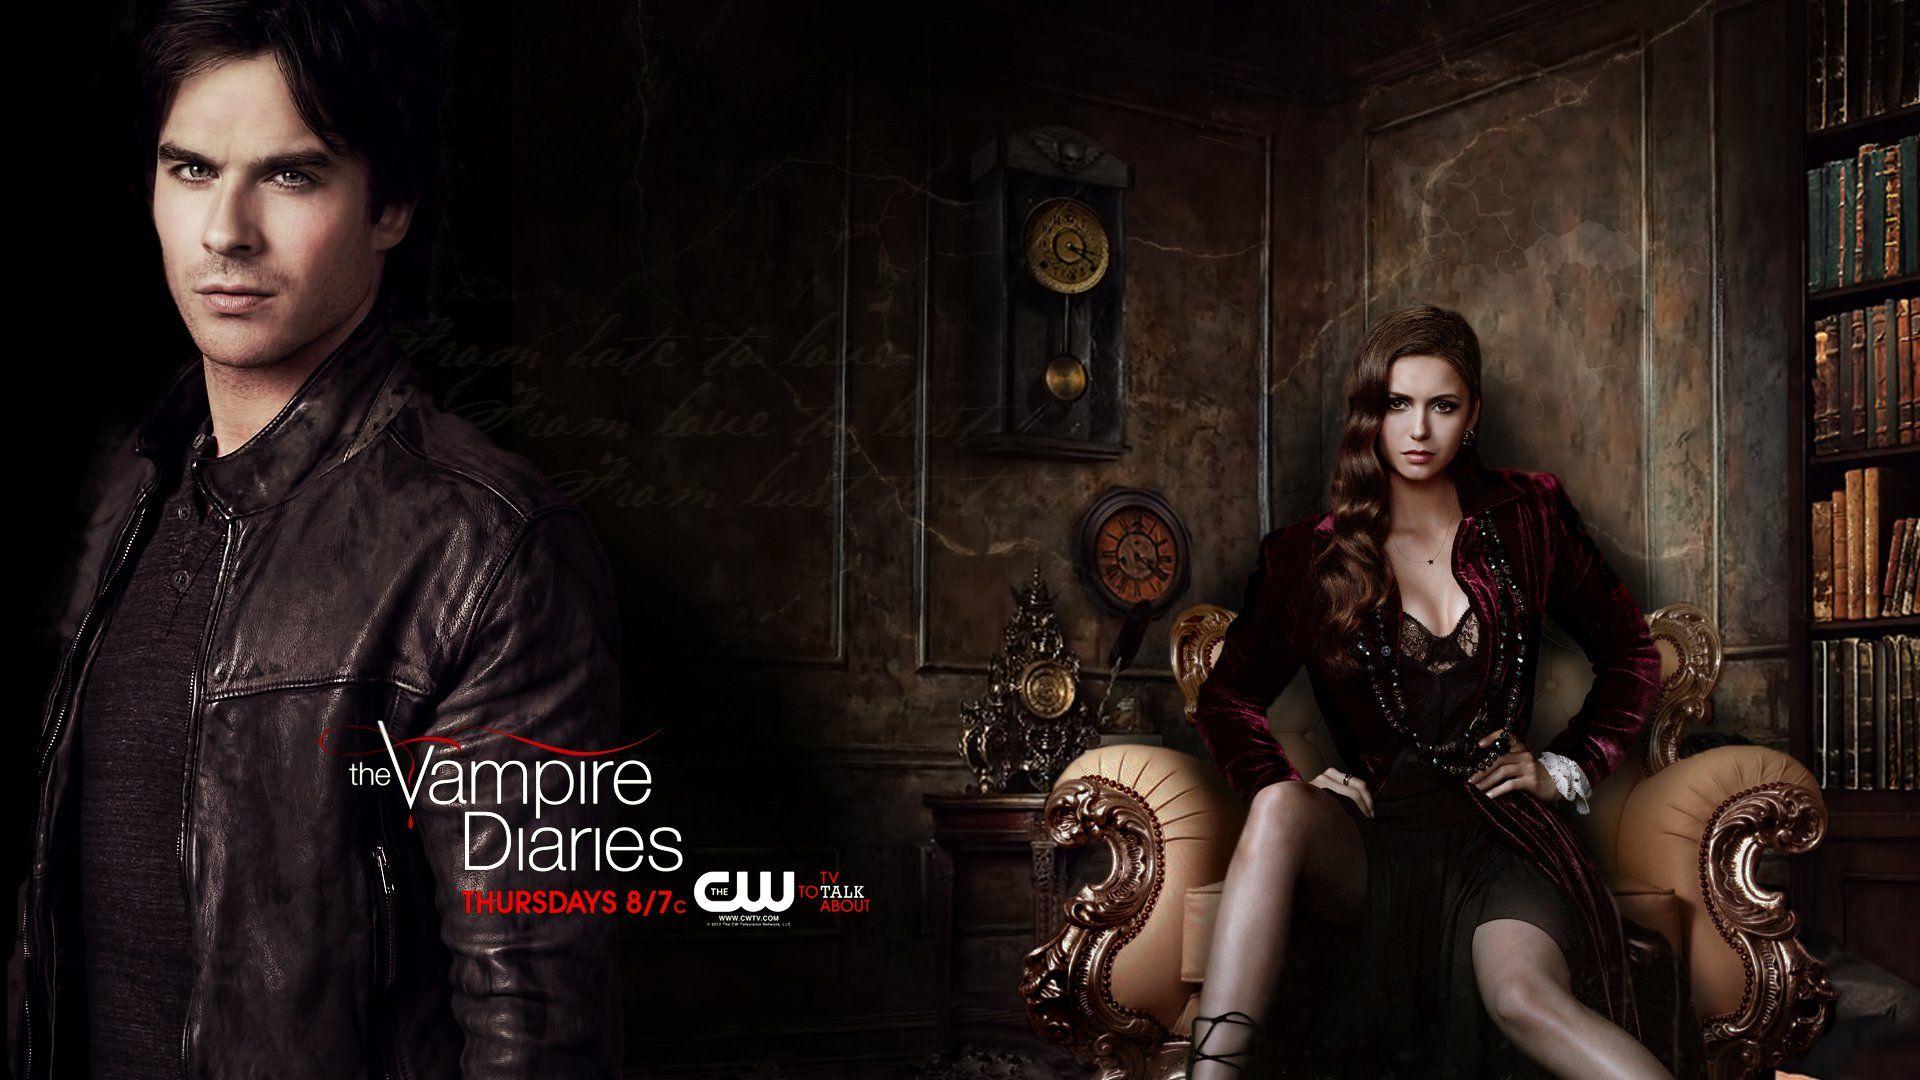 The Vampire Diaries HD Wallpaper and Background Image